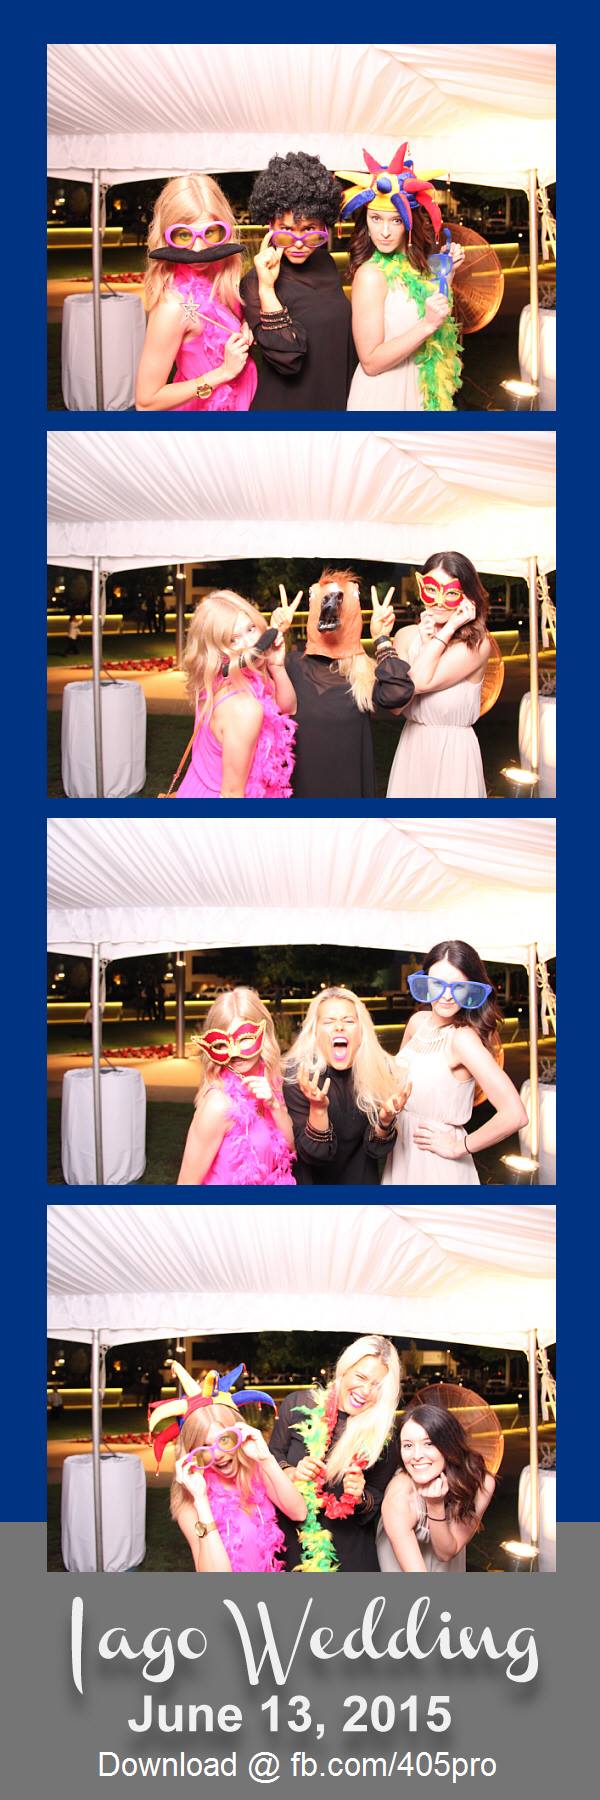 Oklahoma Midwest City Photo Booth Rentals Civic Center Hall Of Mirrors